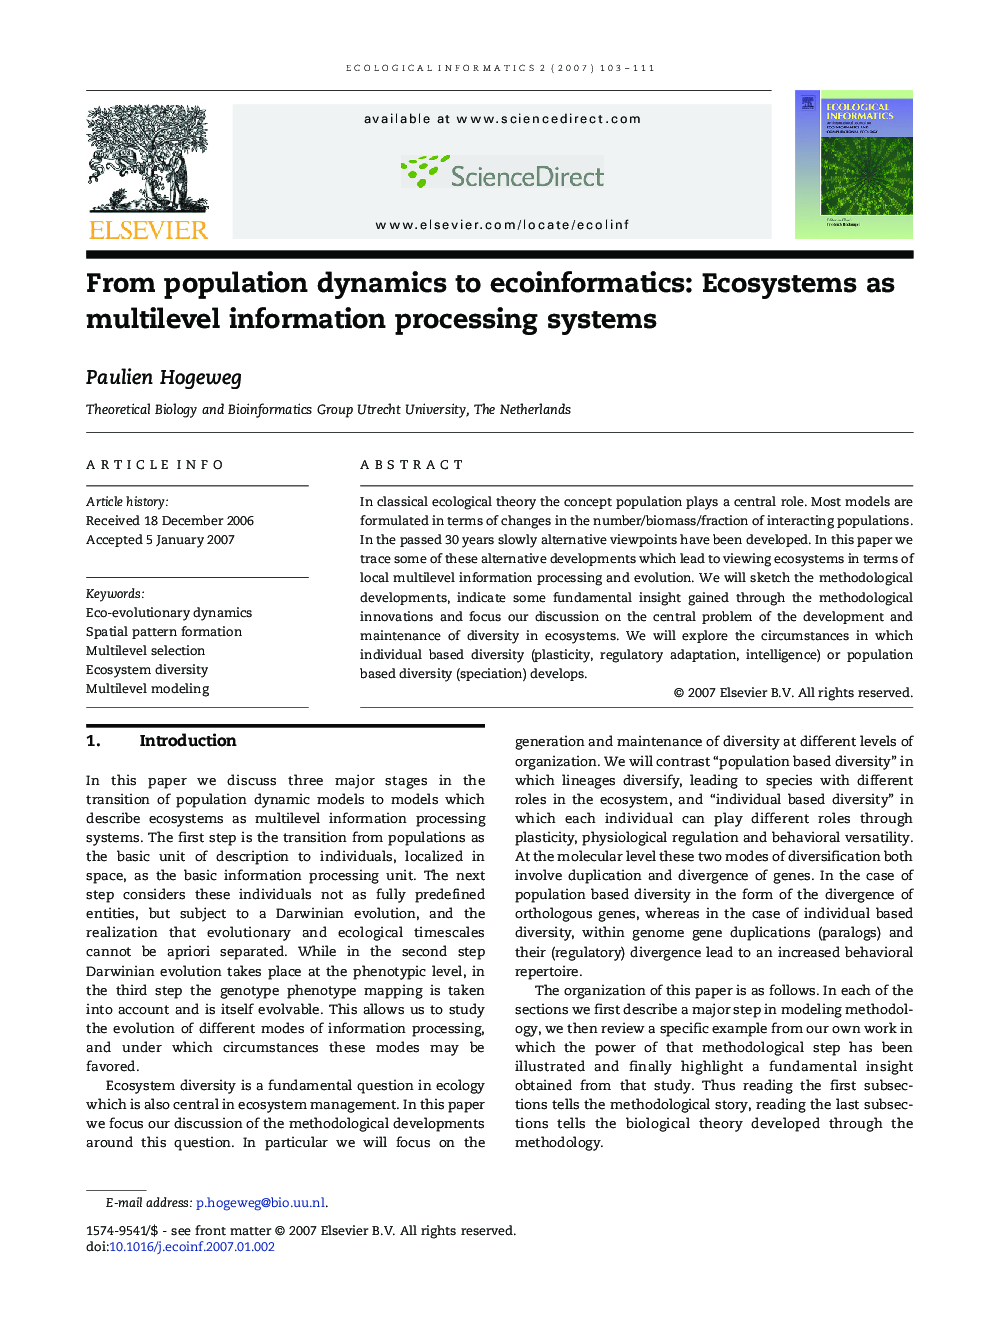 From population dynamics to ecoinformatics: Ecosystems as multilevel information processing systems